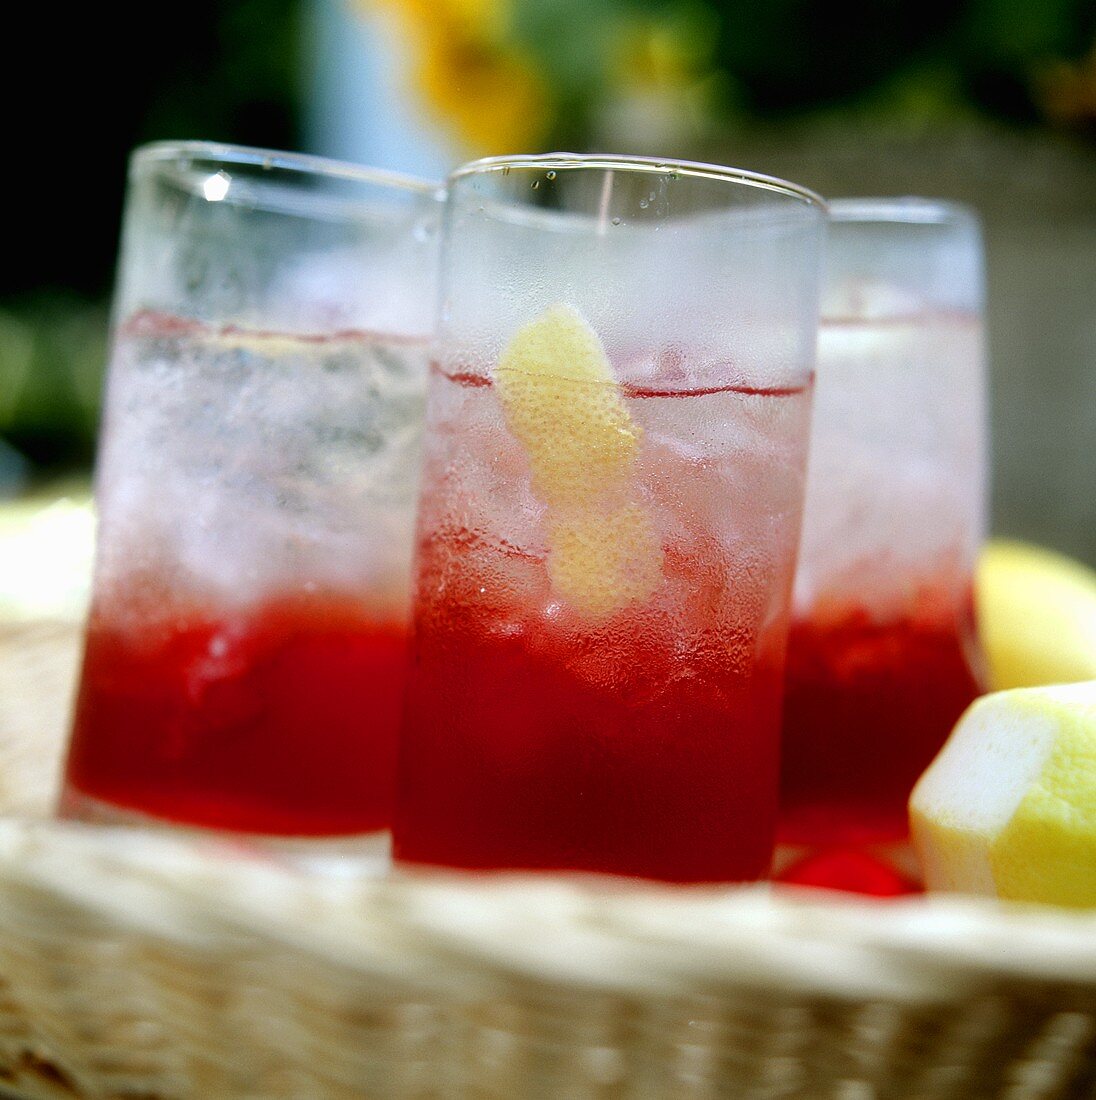 Several glasses of Campari with ice & lemon on wicker tray